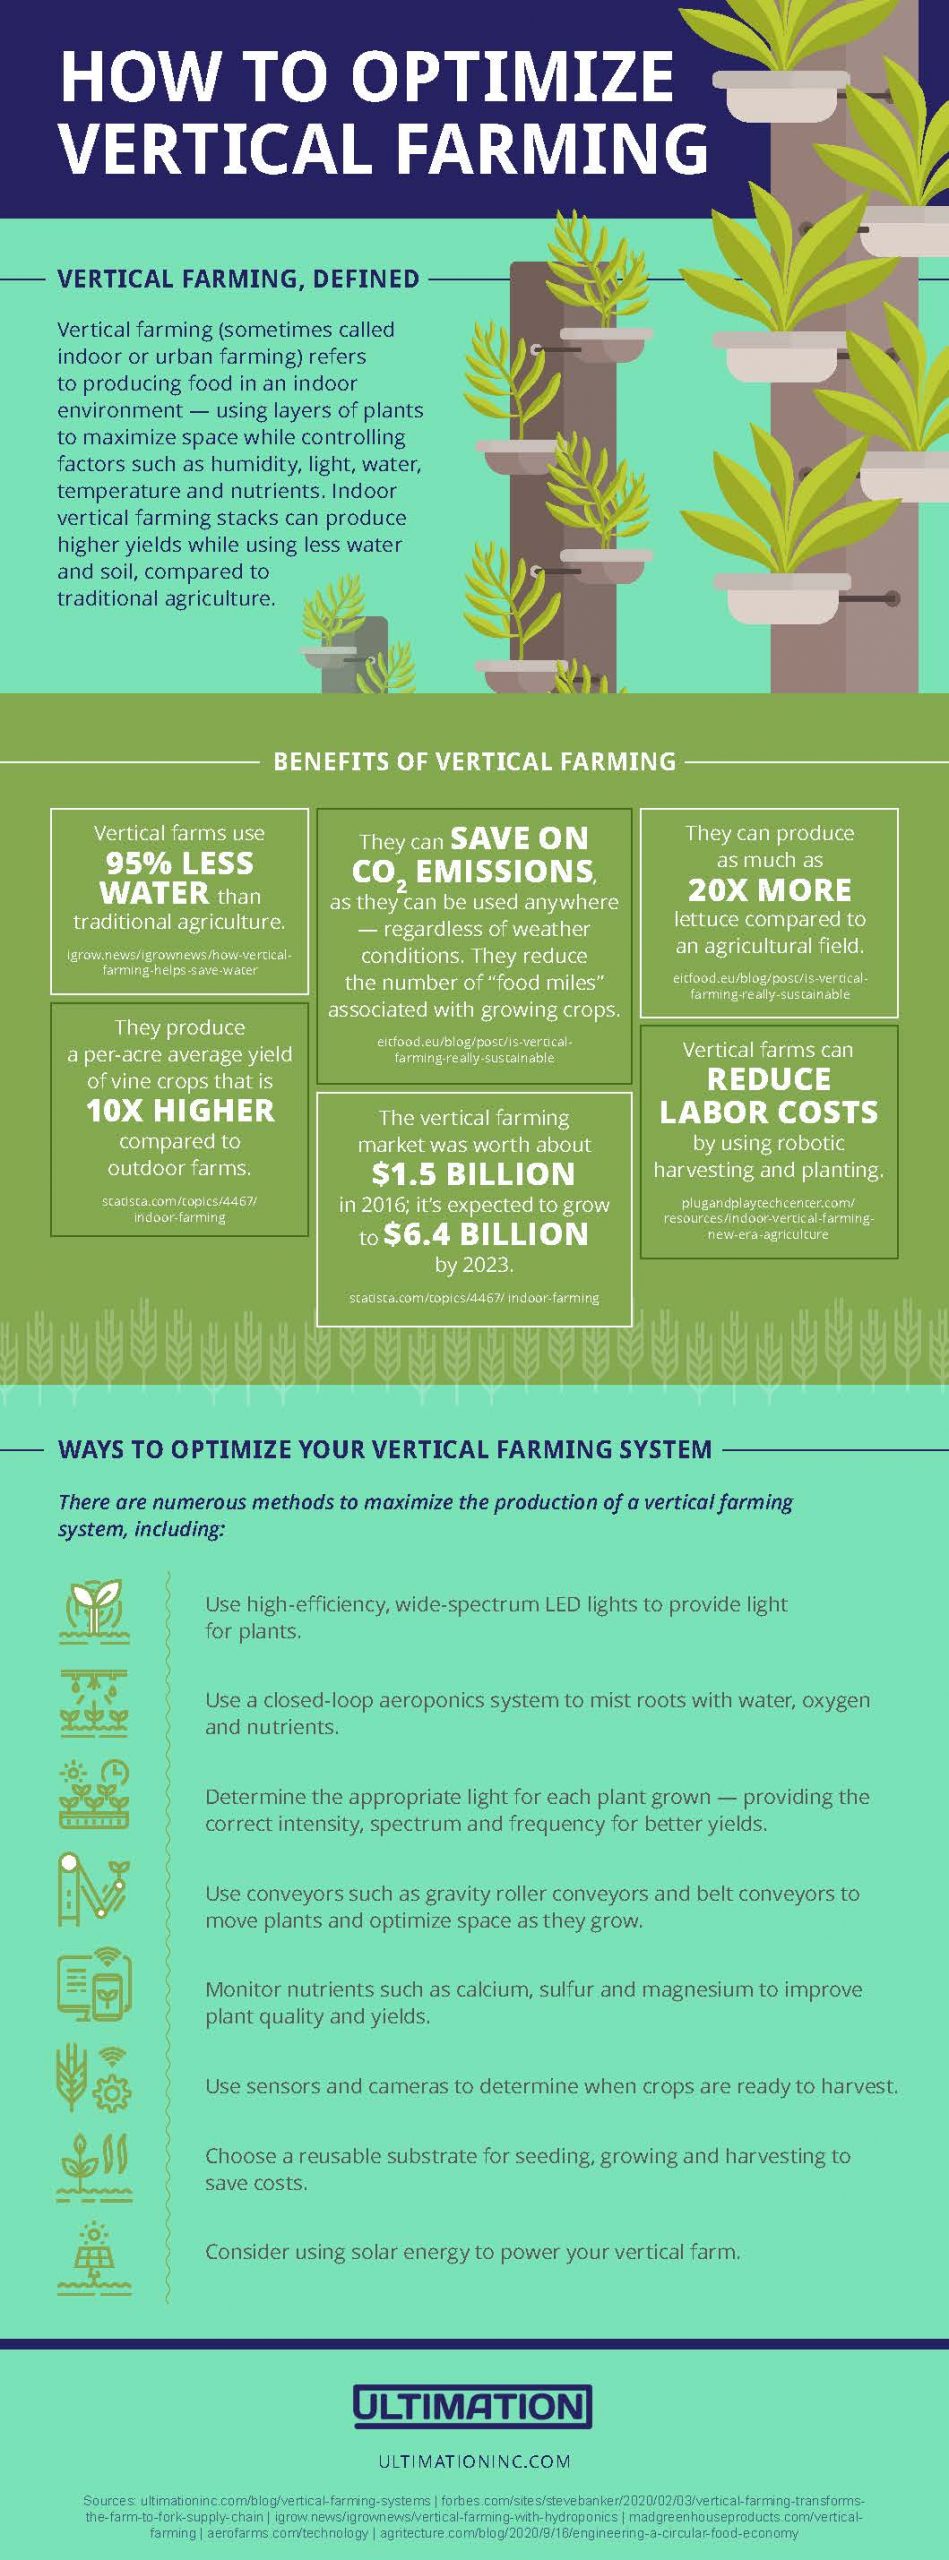 How To Optimize Vertical Farming